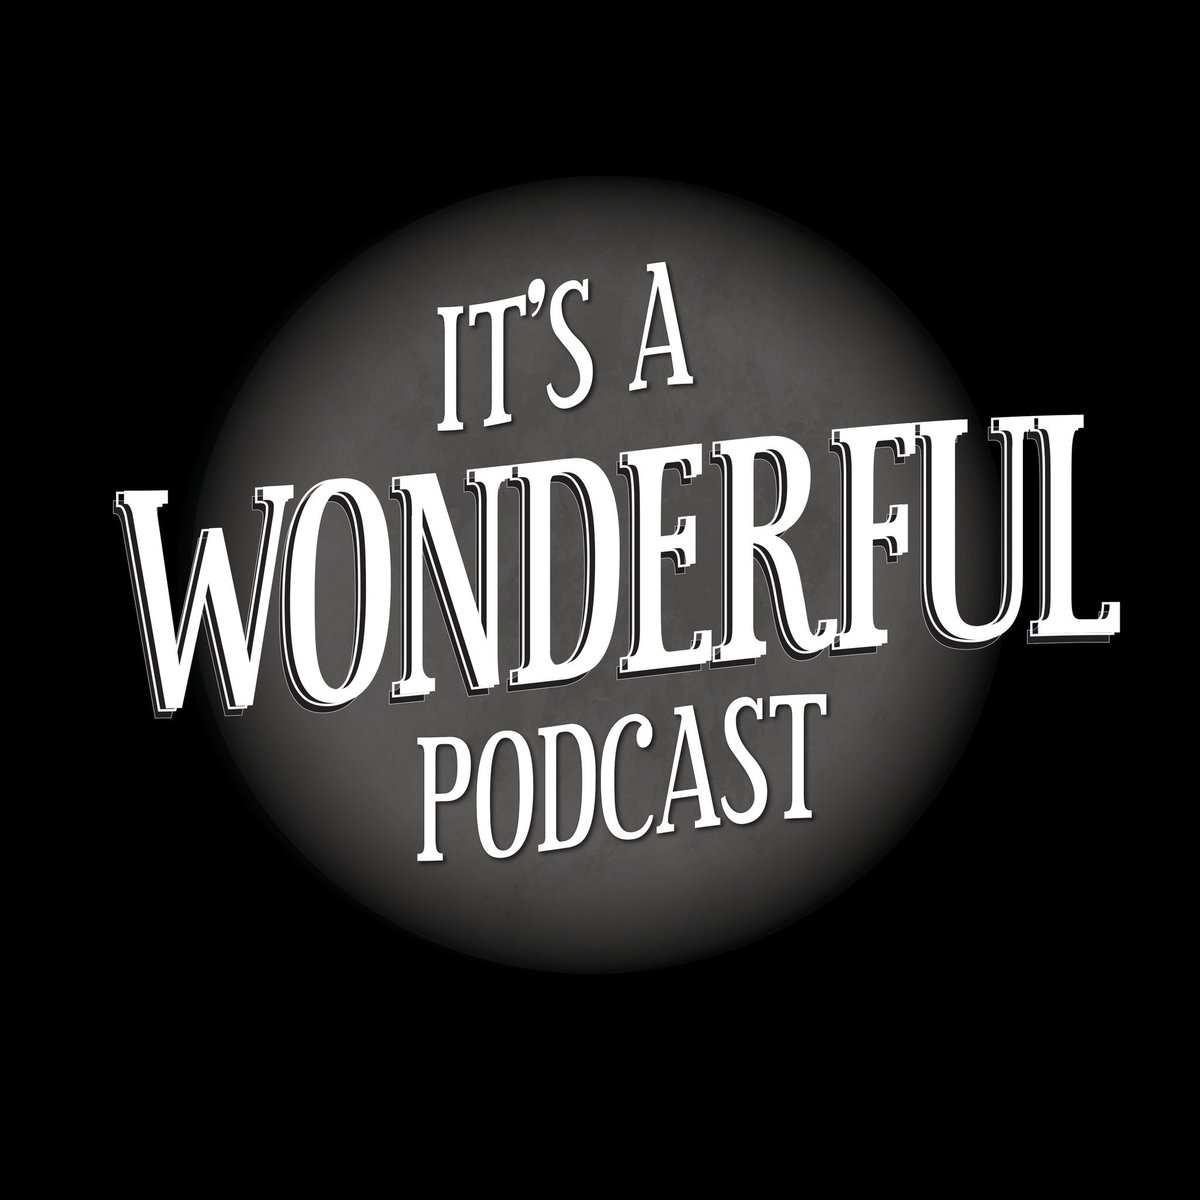 #NewProfilePic EXCITING DEVELOPMENTS coming to the It's A Wonderful Podcast feed 😁👀

More to follow!! #PodernFamily #Podcast #Podcasts #Podcasting #ItsAWonderful1 #PodcastGrowth